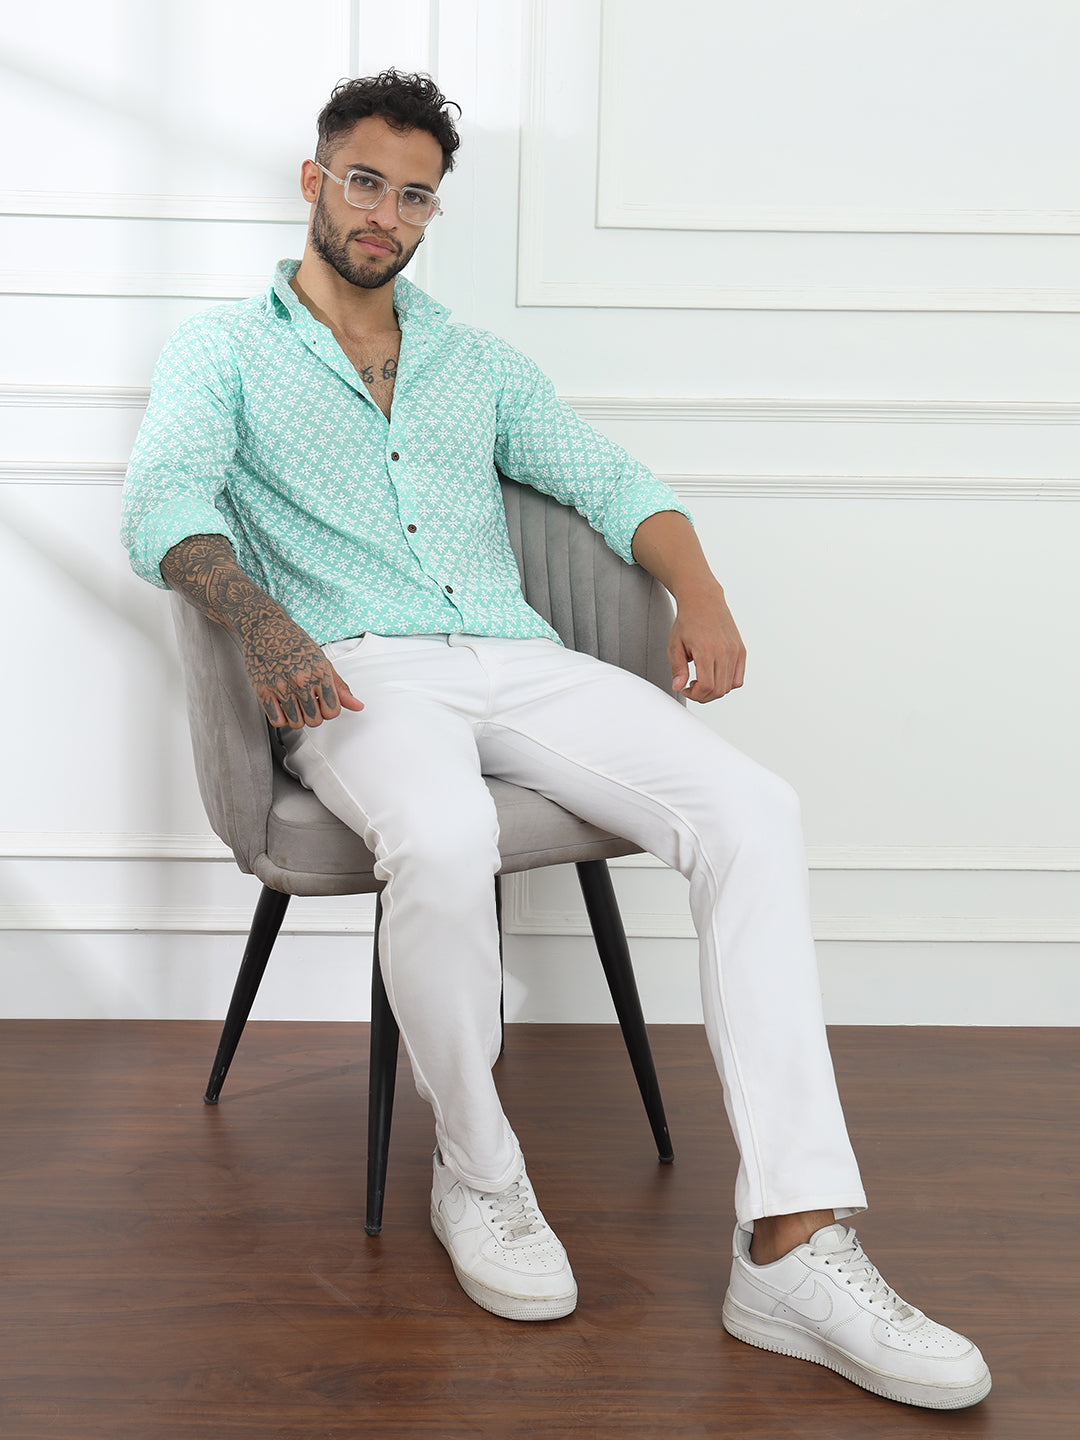 Dark Green Plaid Dress Shirt with White Pants Outfits For Men (2 ideas &  outfits) | Lookastic